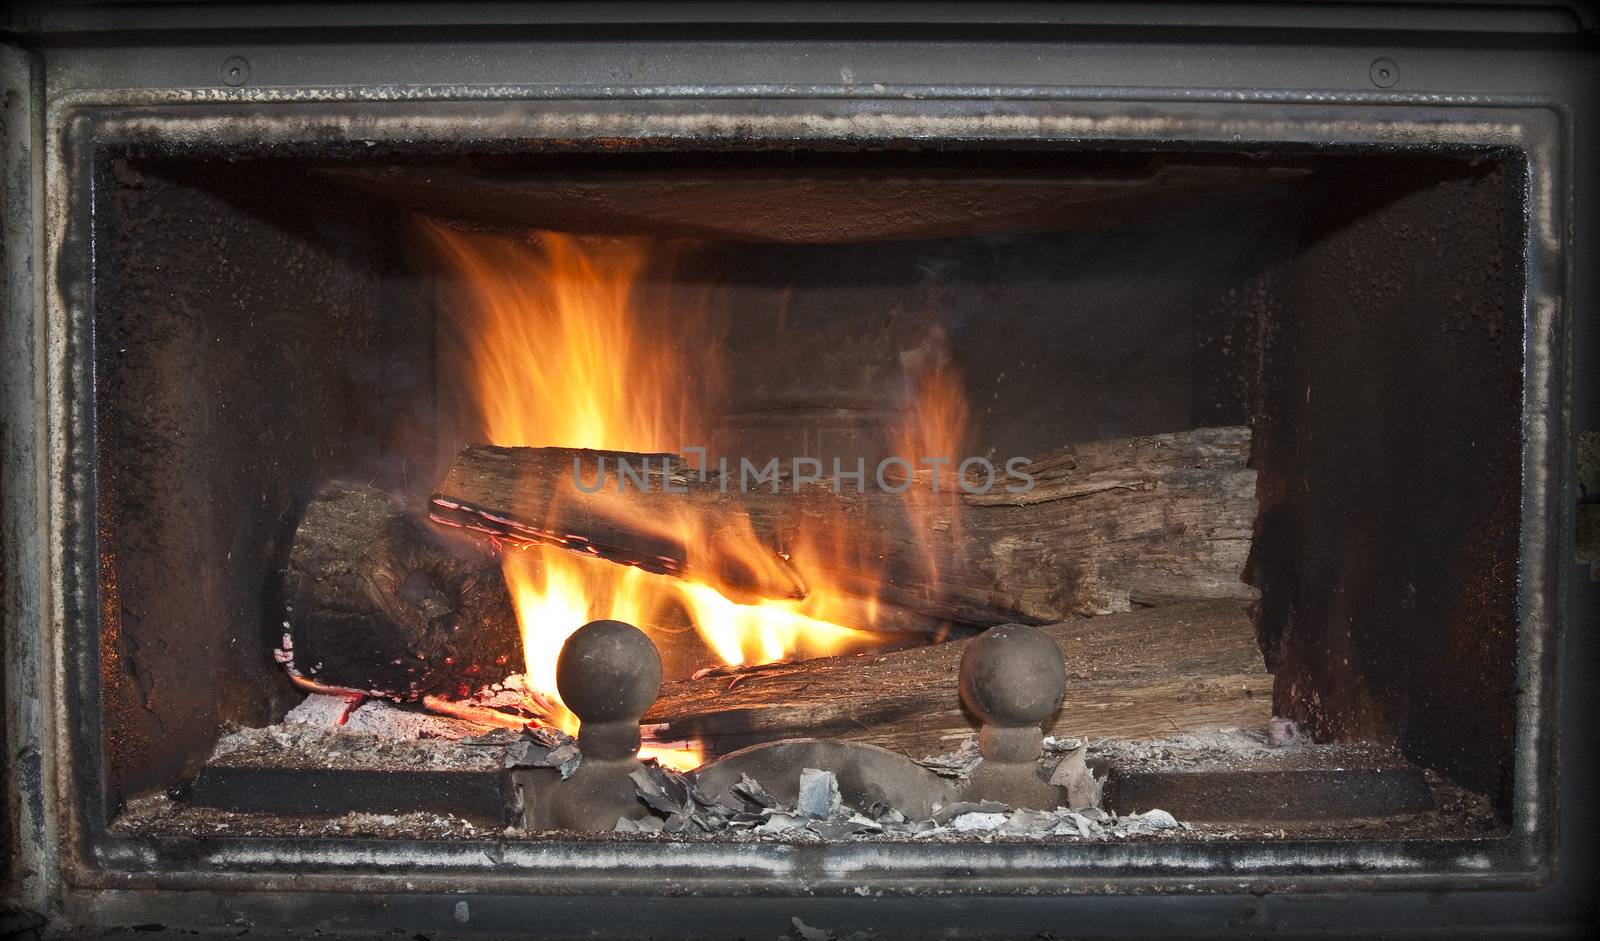 Close-up shot of a burning log in a fireplace.